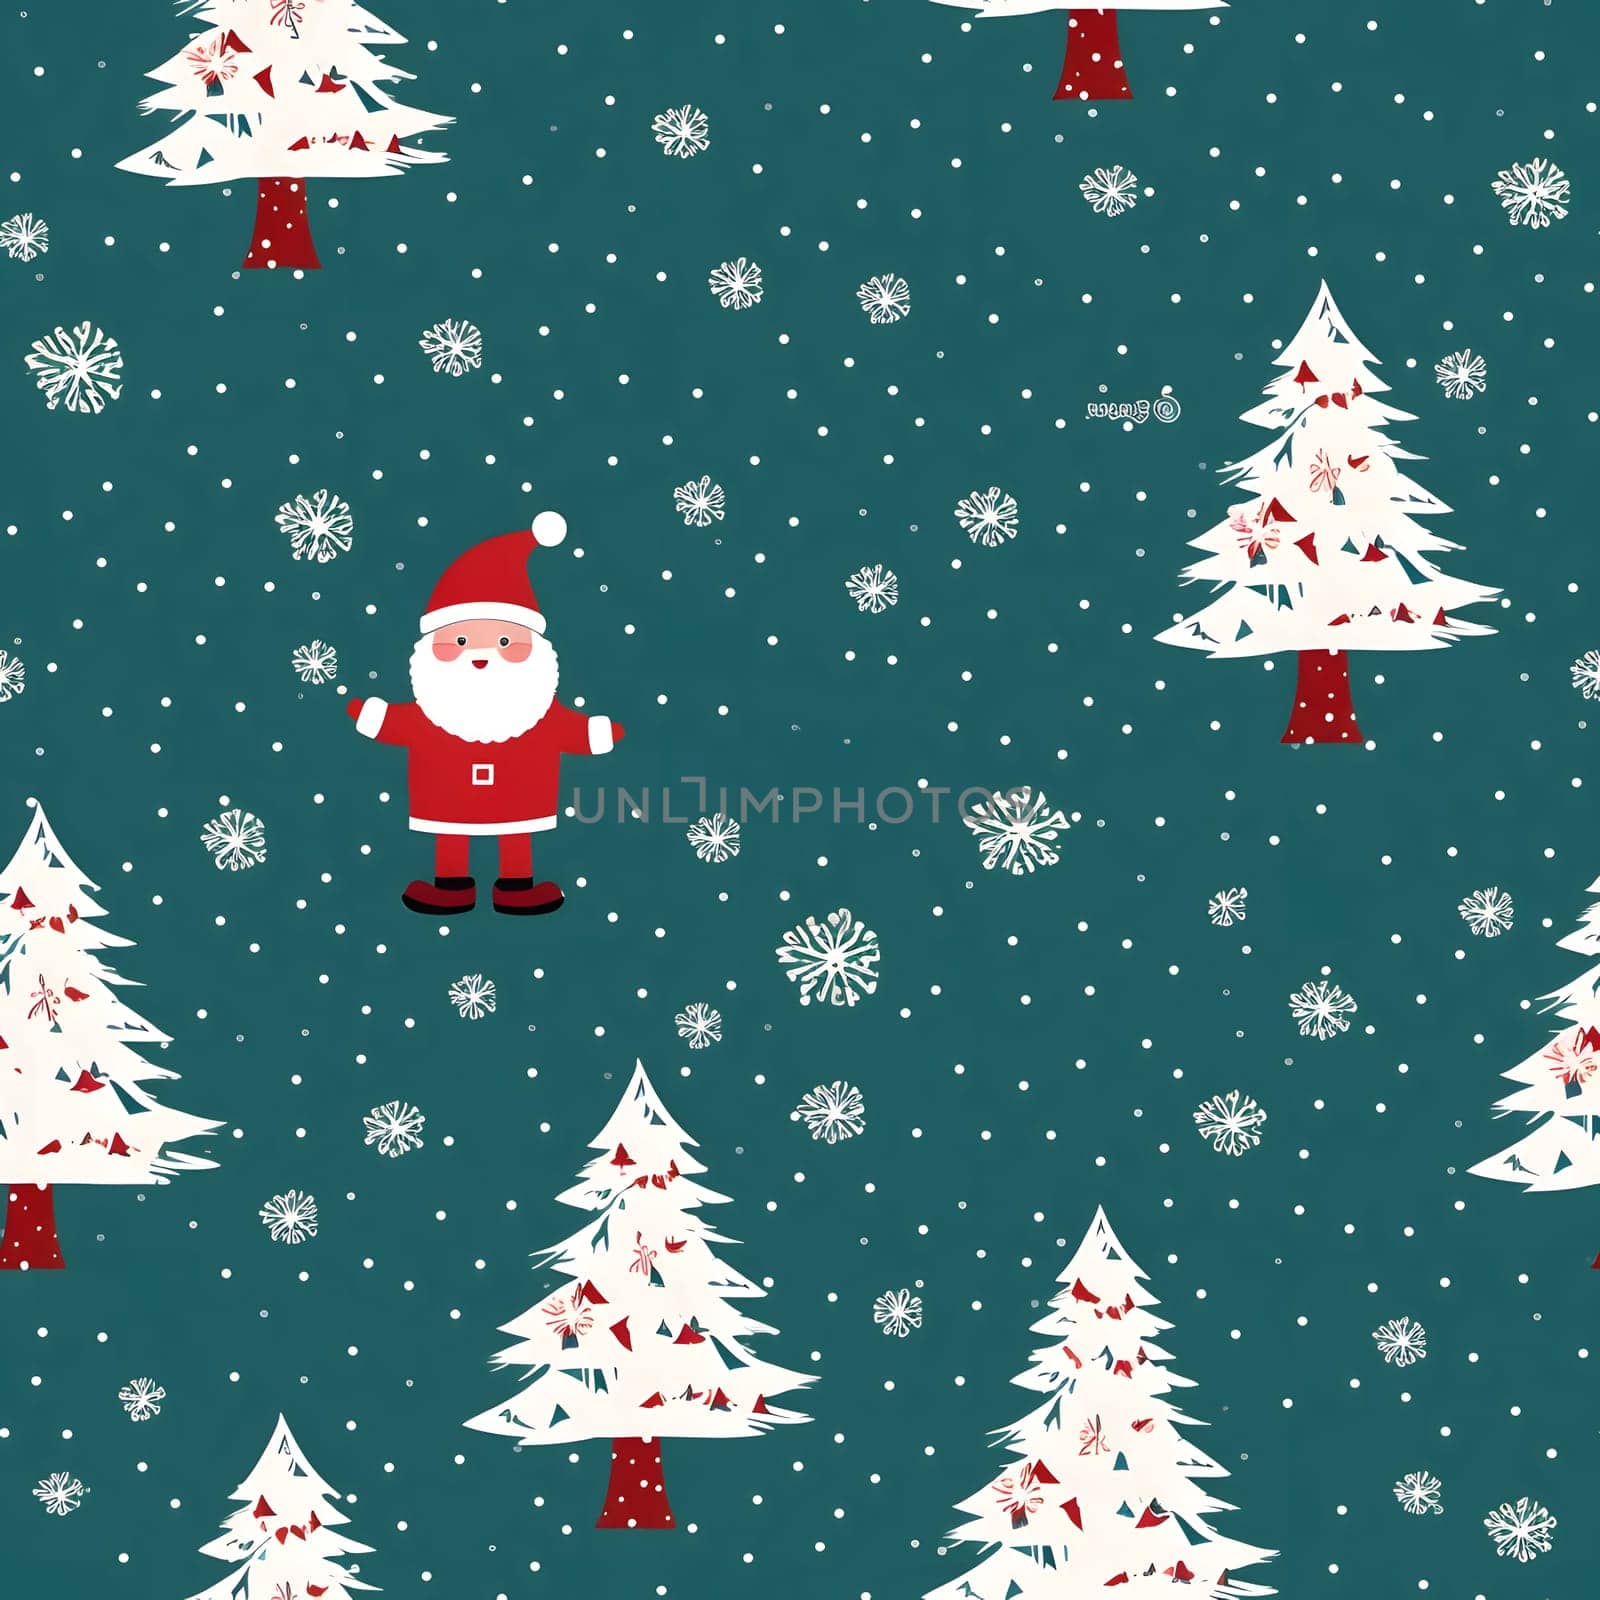 Christmas trees and santa claus as abstract background, wallpaper, banner, texture design with pattern - vector. Dark colors. by ThemesS